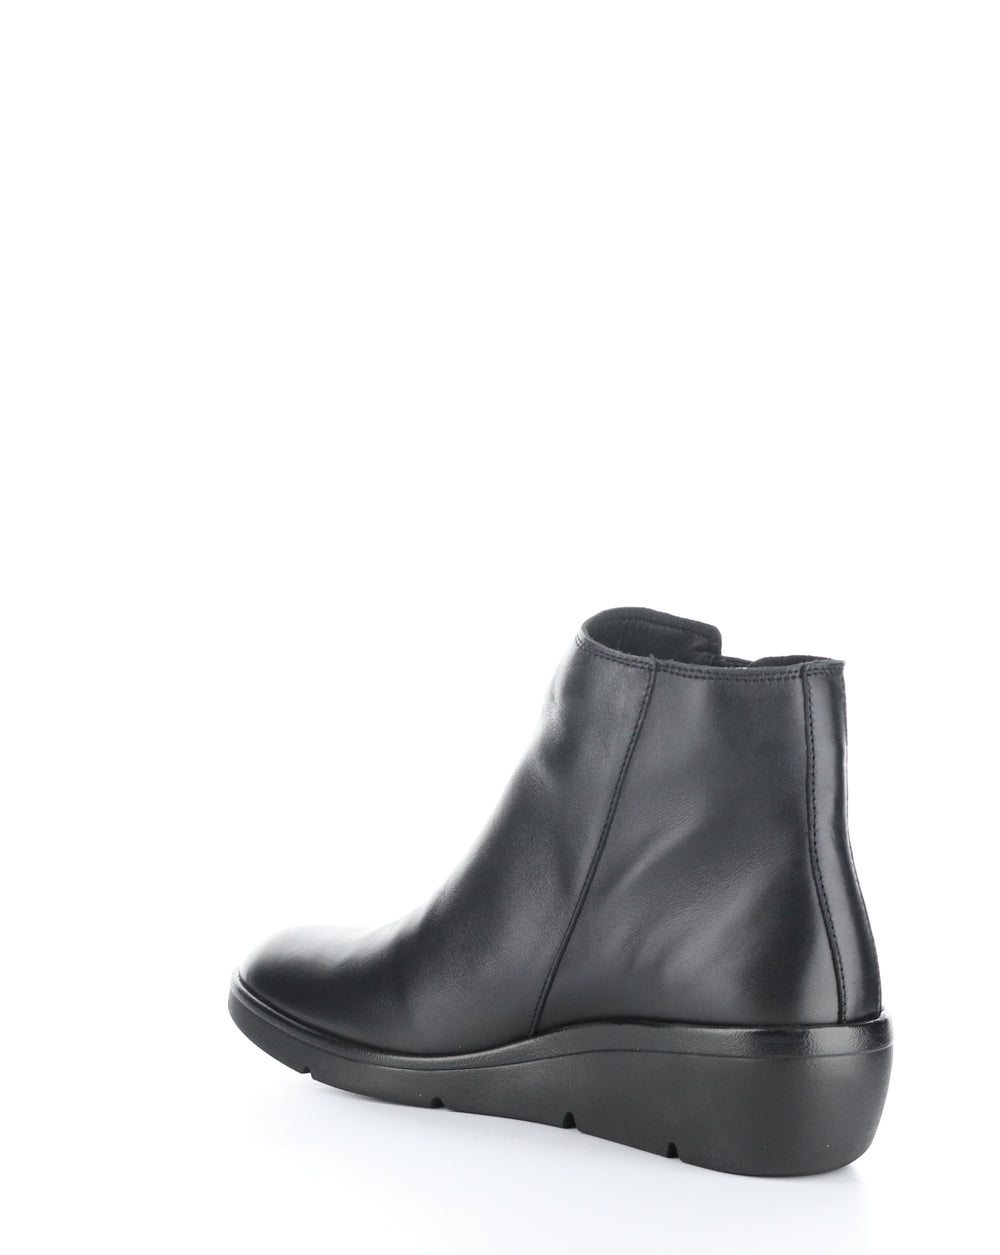 NULA550FLY 004 BLACK Round Toe Boots